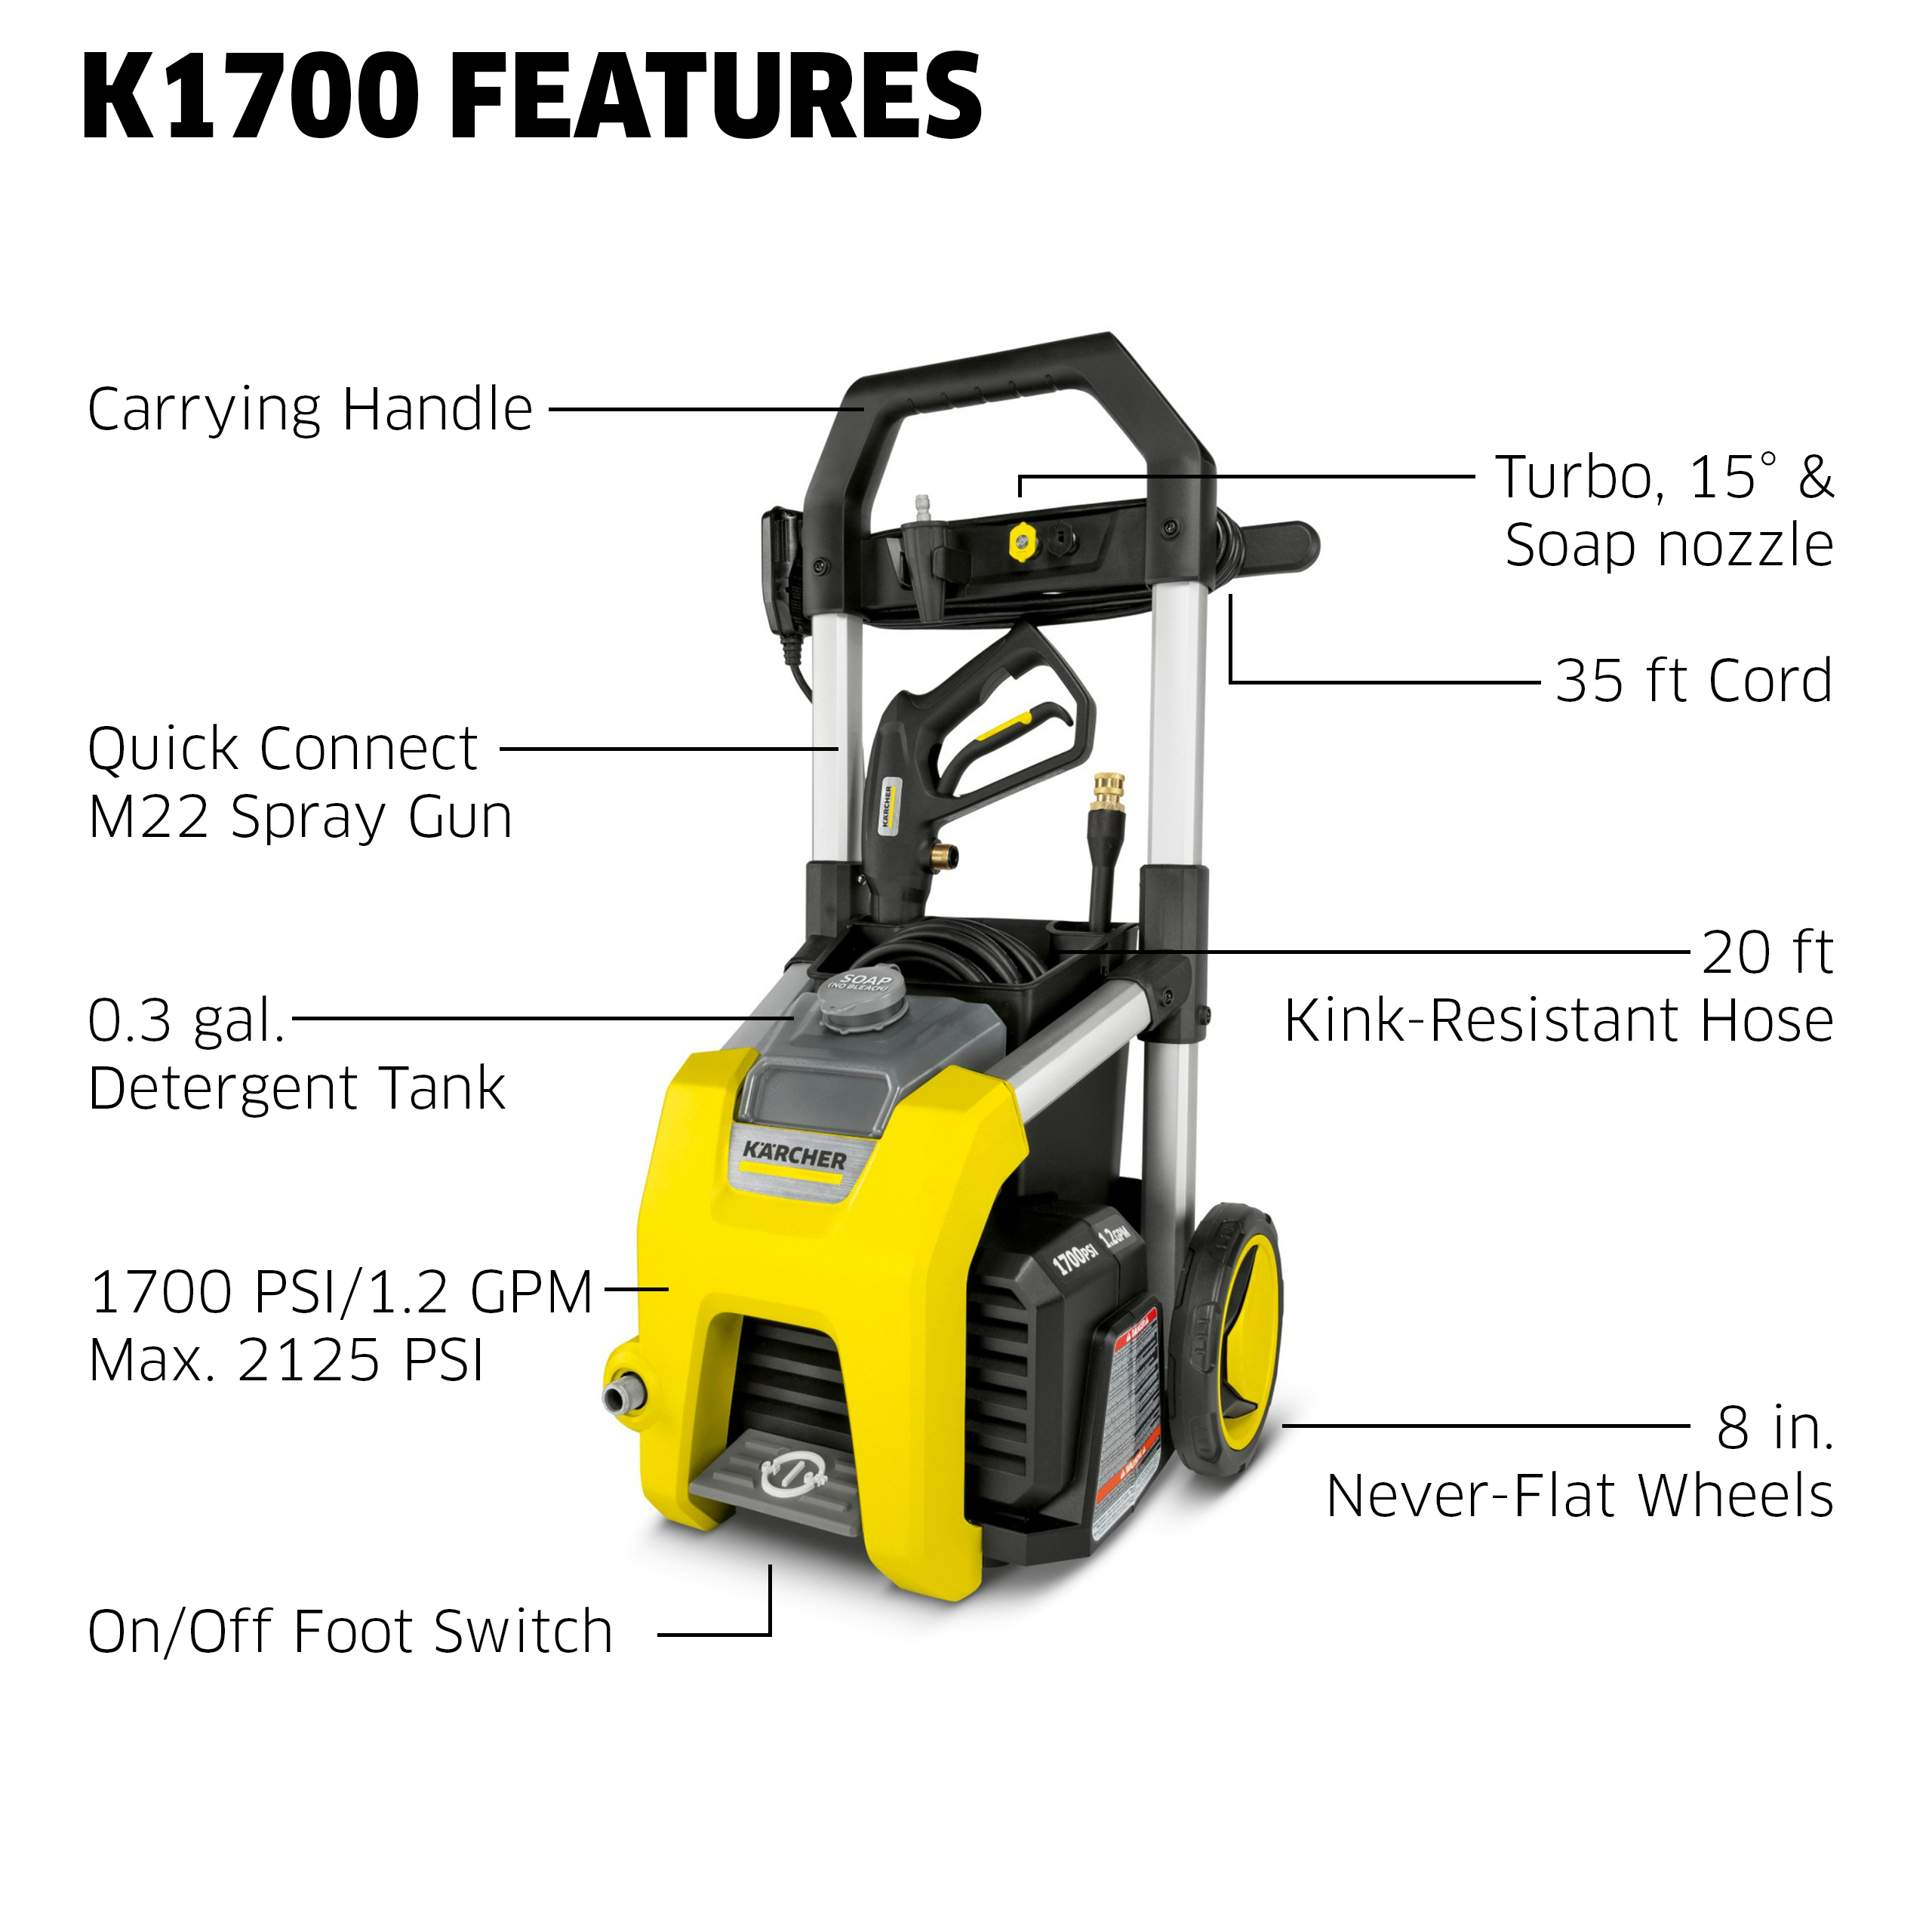 Karcher K1700 2125 PSI Max, Electric Pressure Washer with Hose and 3 Nozzles, 1.2 GPM, Power Washer - image 3 of 9